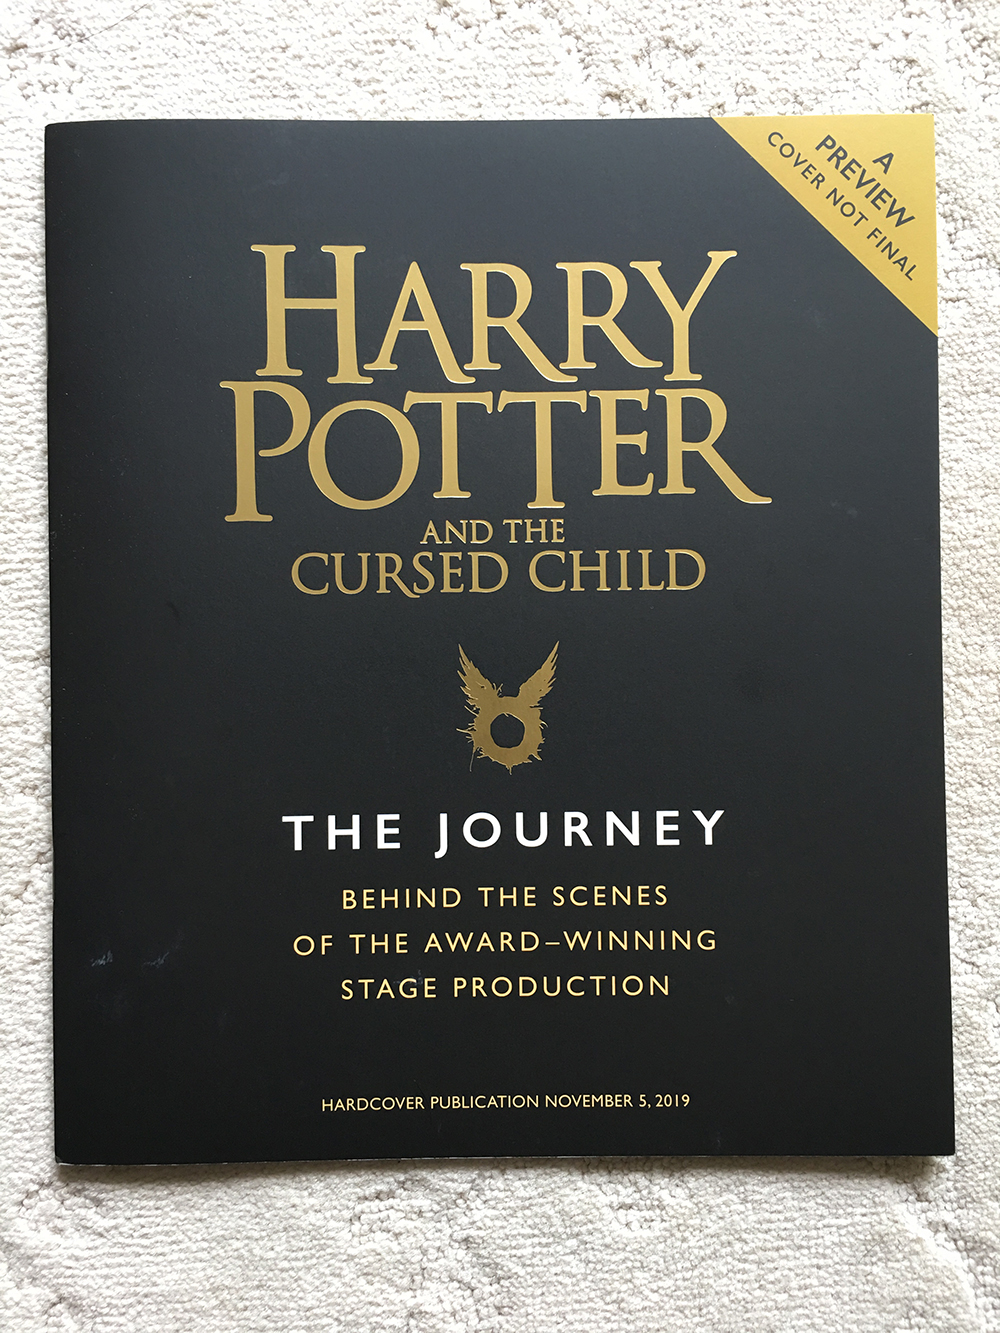 “Harry Potter and the Cursed Child: The Journey” preview booklet